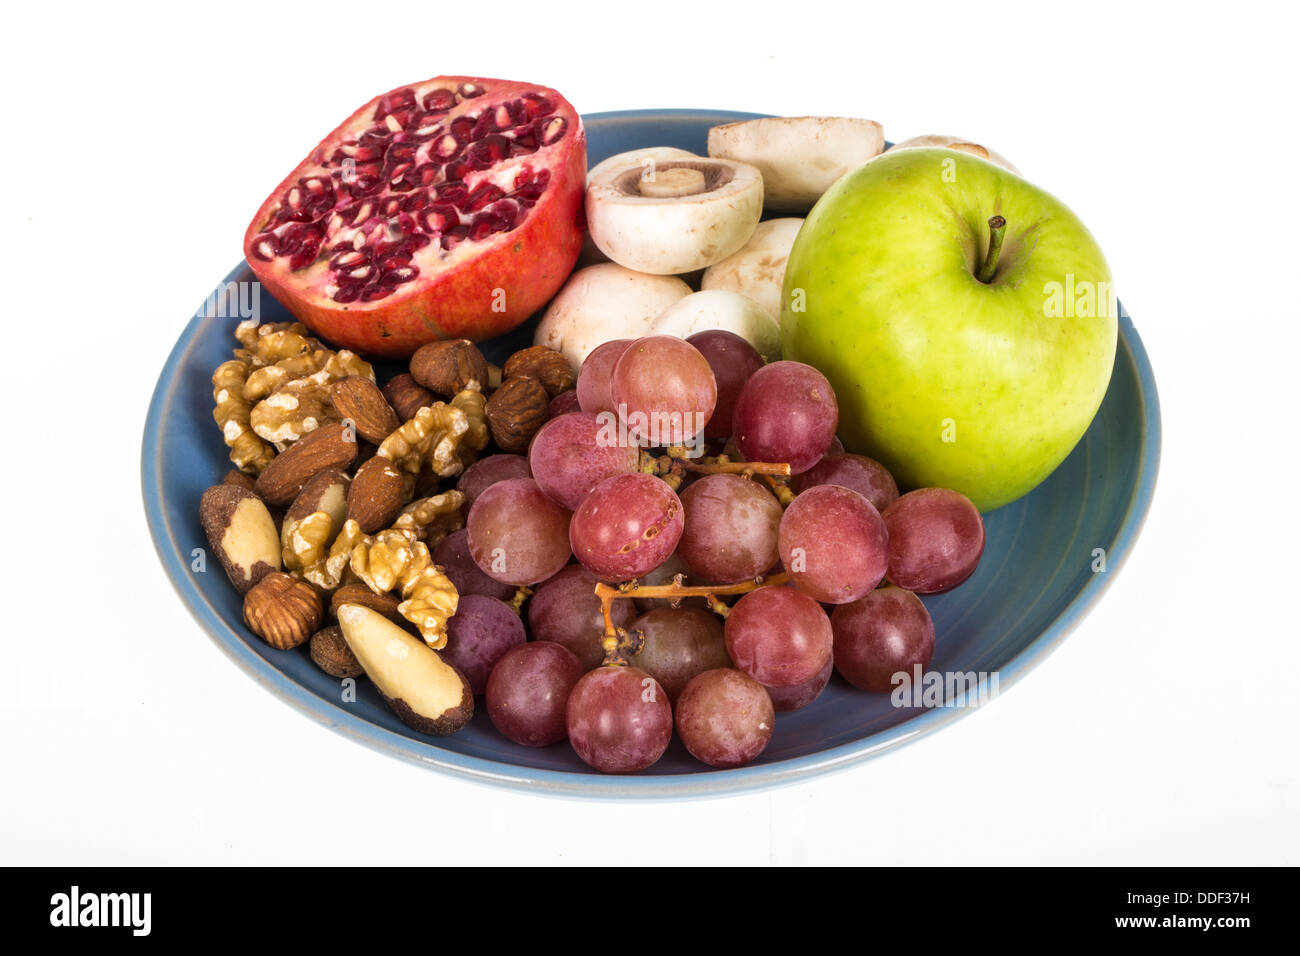 Mixed Plate of Fresh Fruit and Vegetables For a Healthy Low Fat Diet Stock Photo